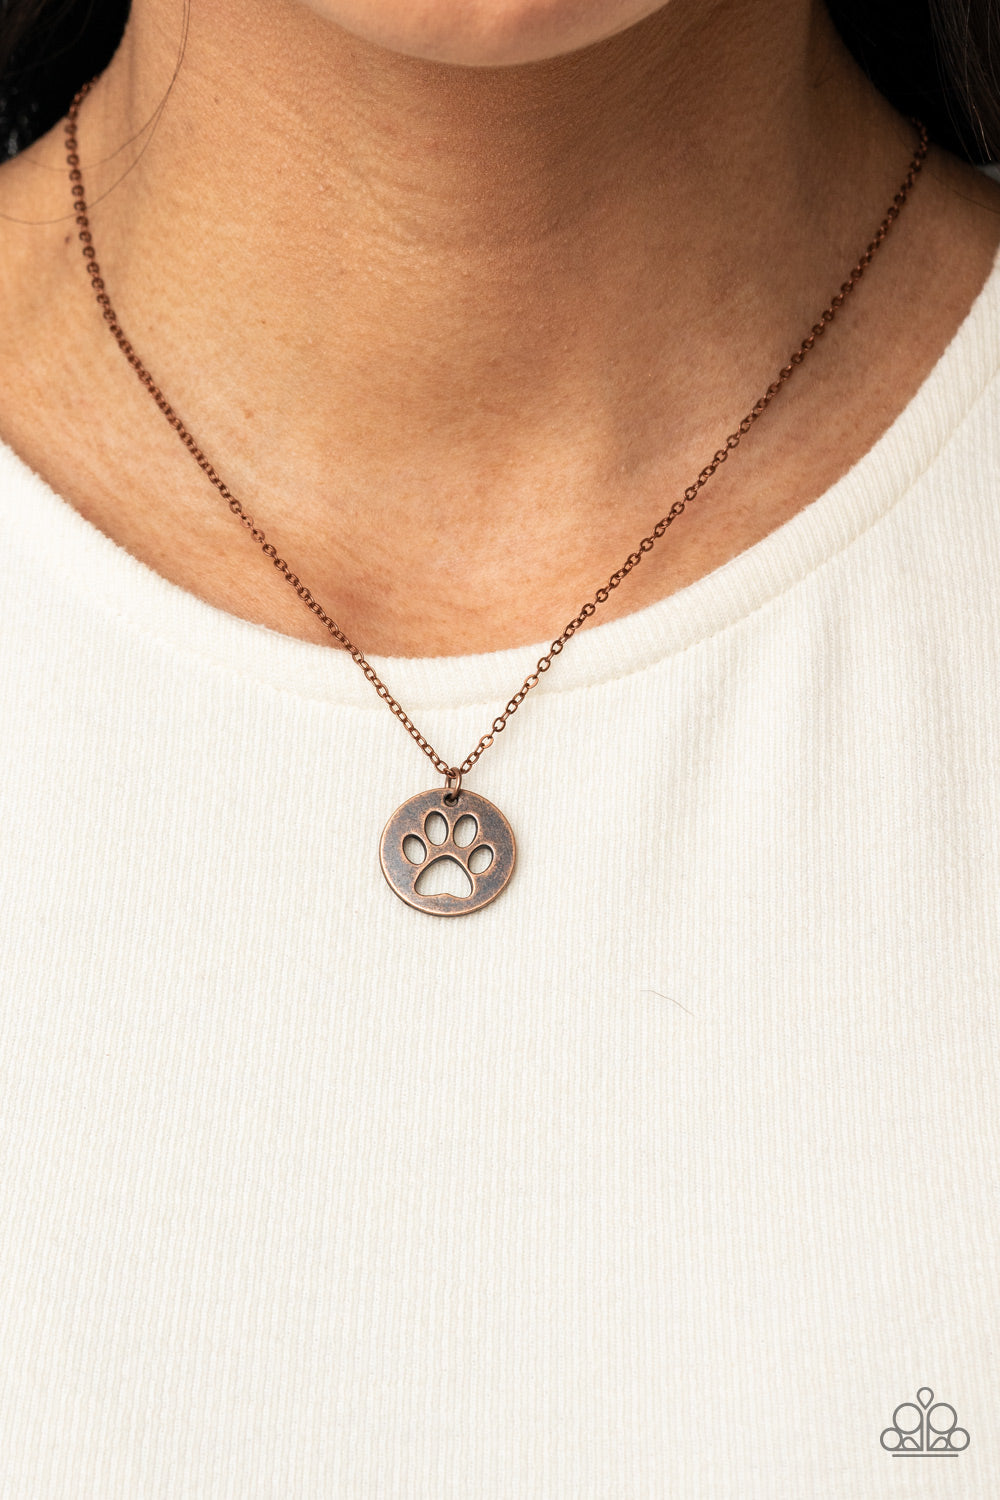 Think PAW-sitive - Copper Pawprint Cutout Disc Pendant Paparazzi Necklace & matching earrings